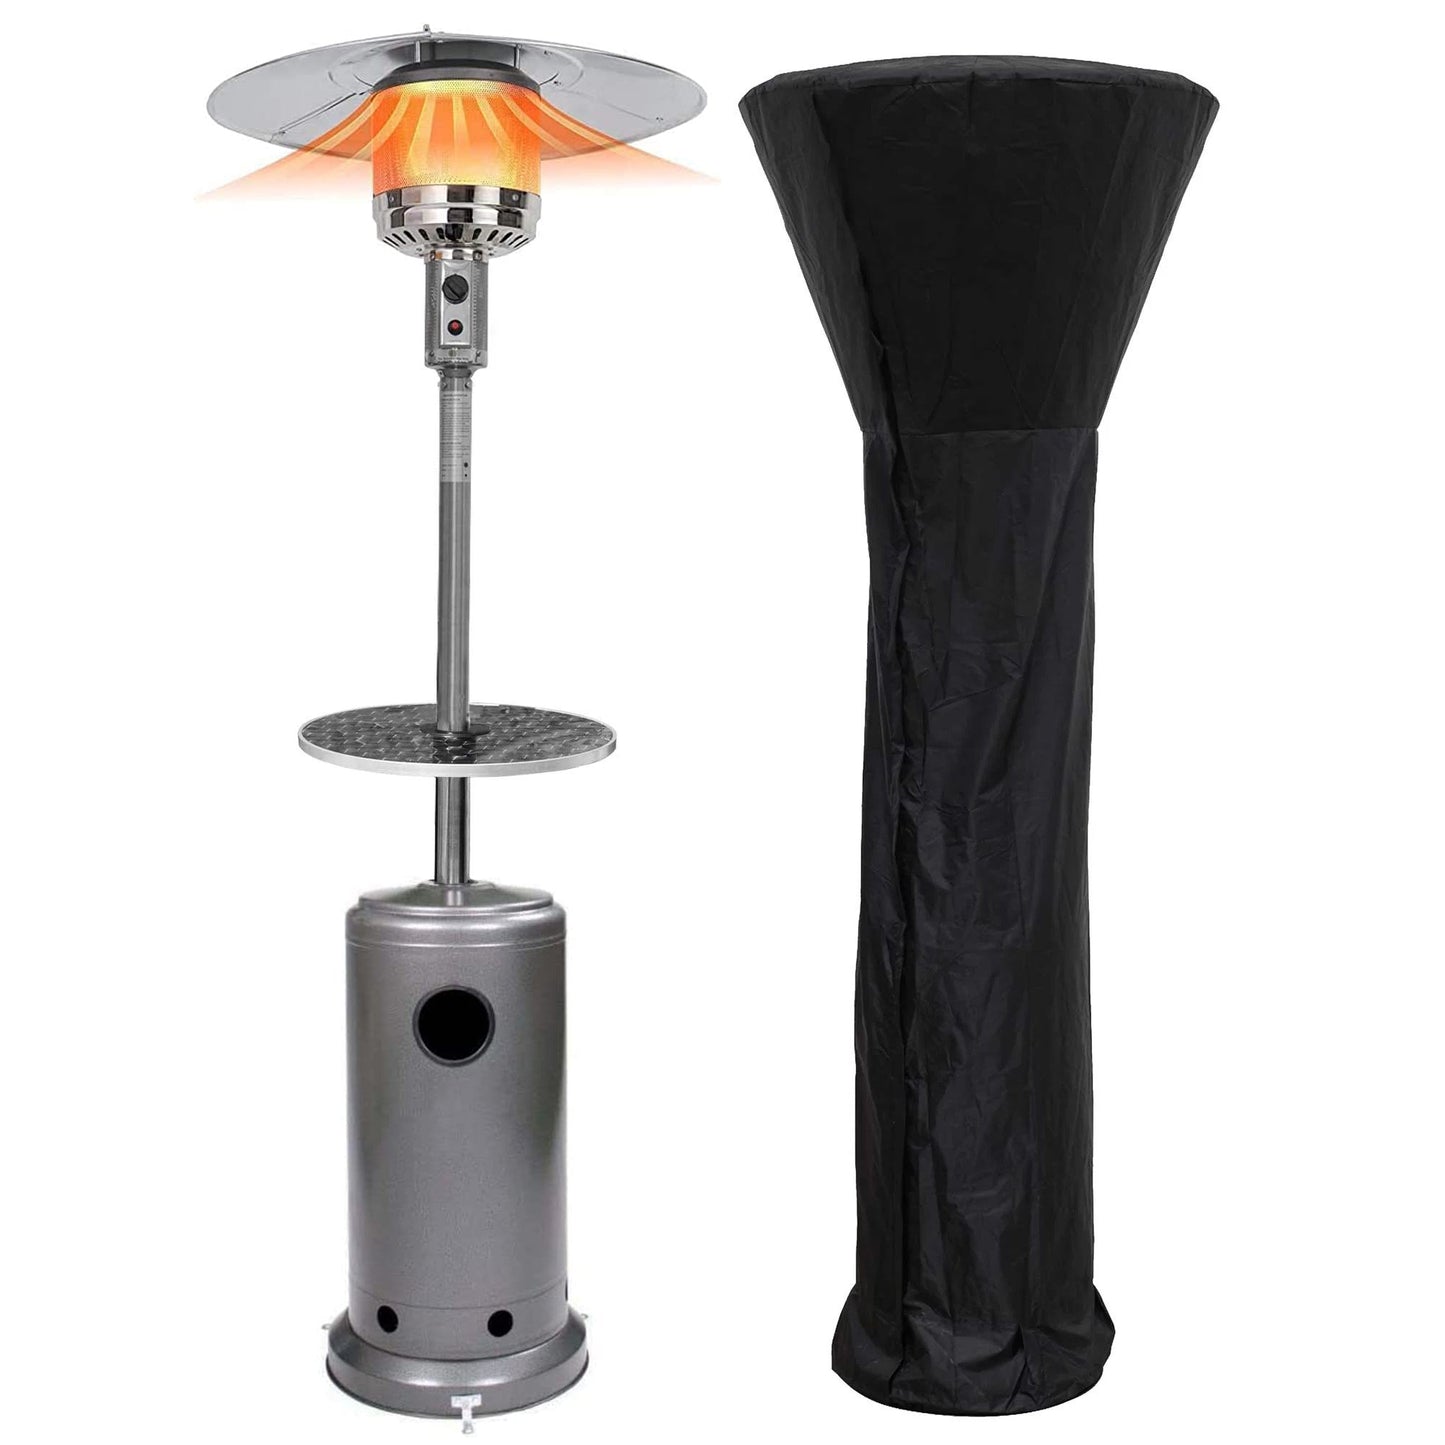 GardenCo Freestanding Outdoor Gas Patio Heater with Drinks Table Colour: Silver - 13.5KW